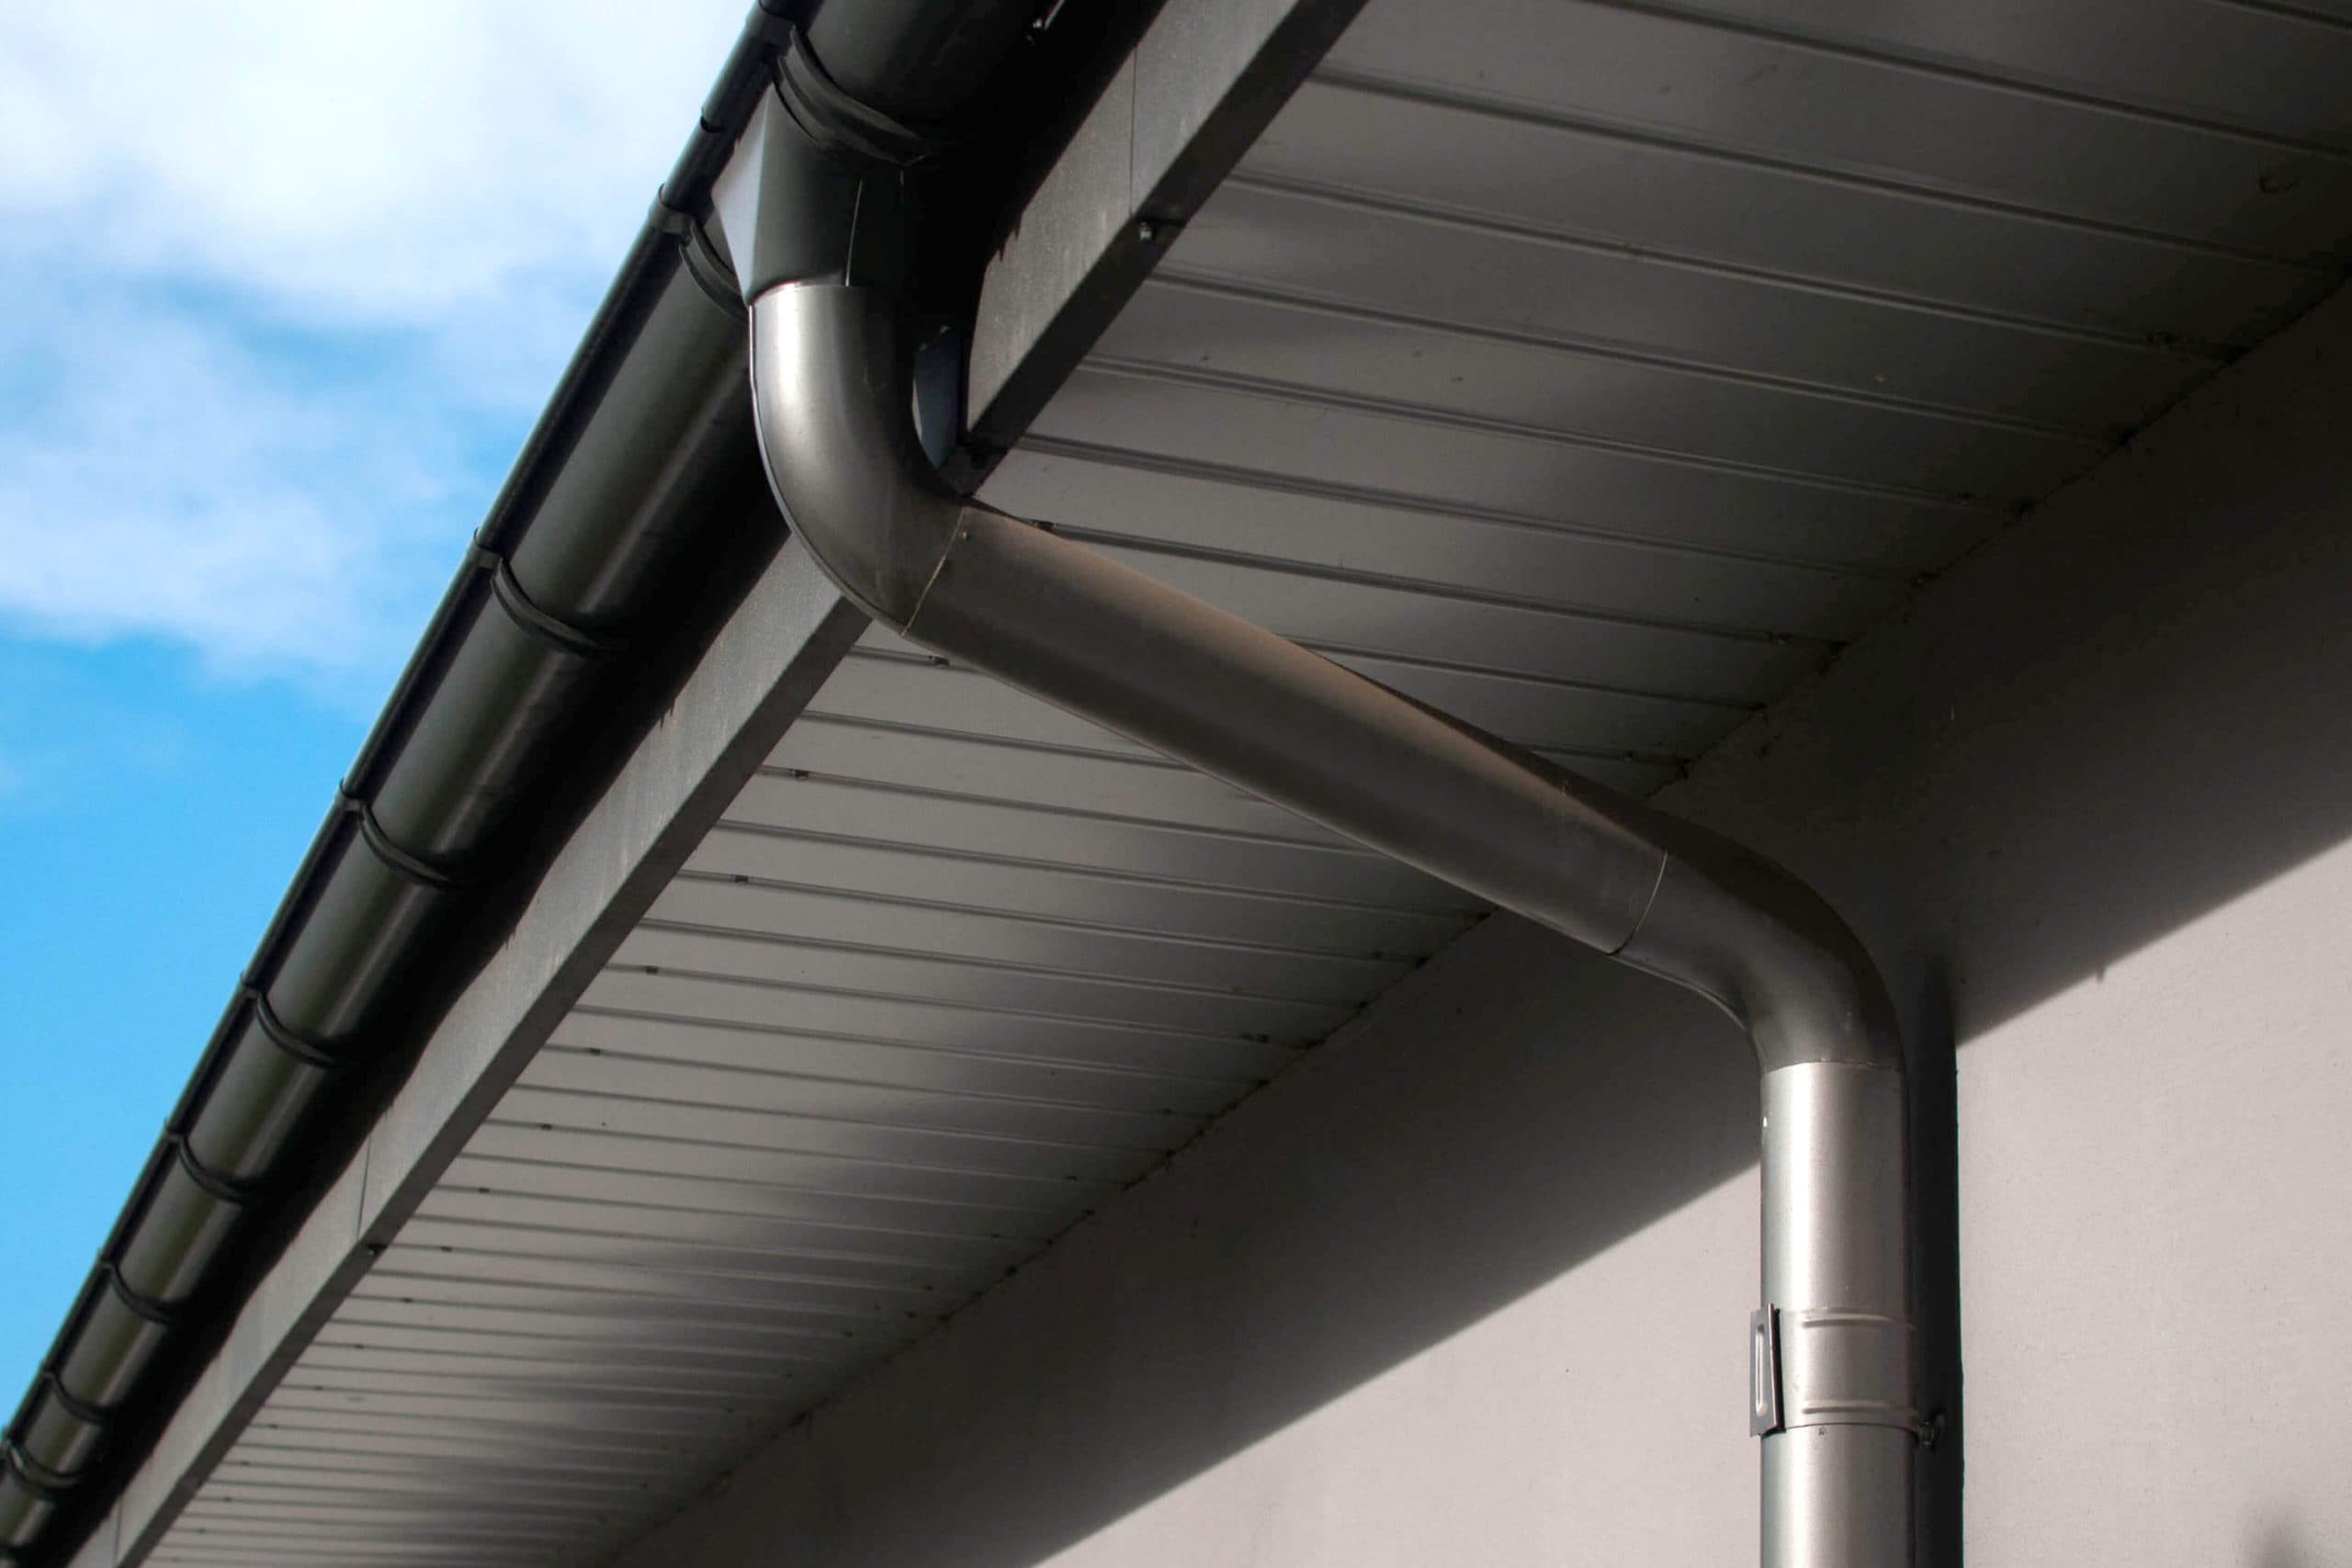 Corrosion-resistant galvanized gutters installed on a commercial building in San Antonio